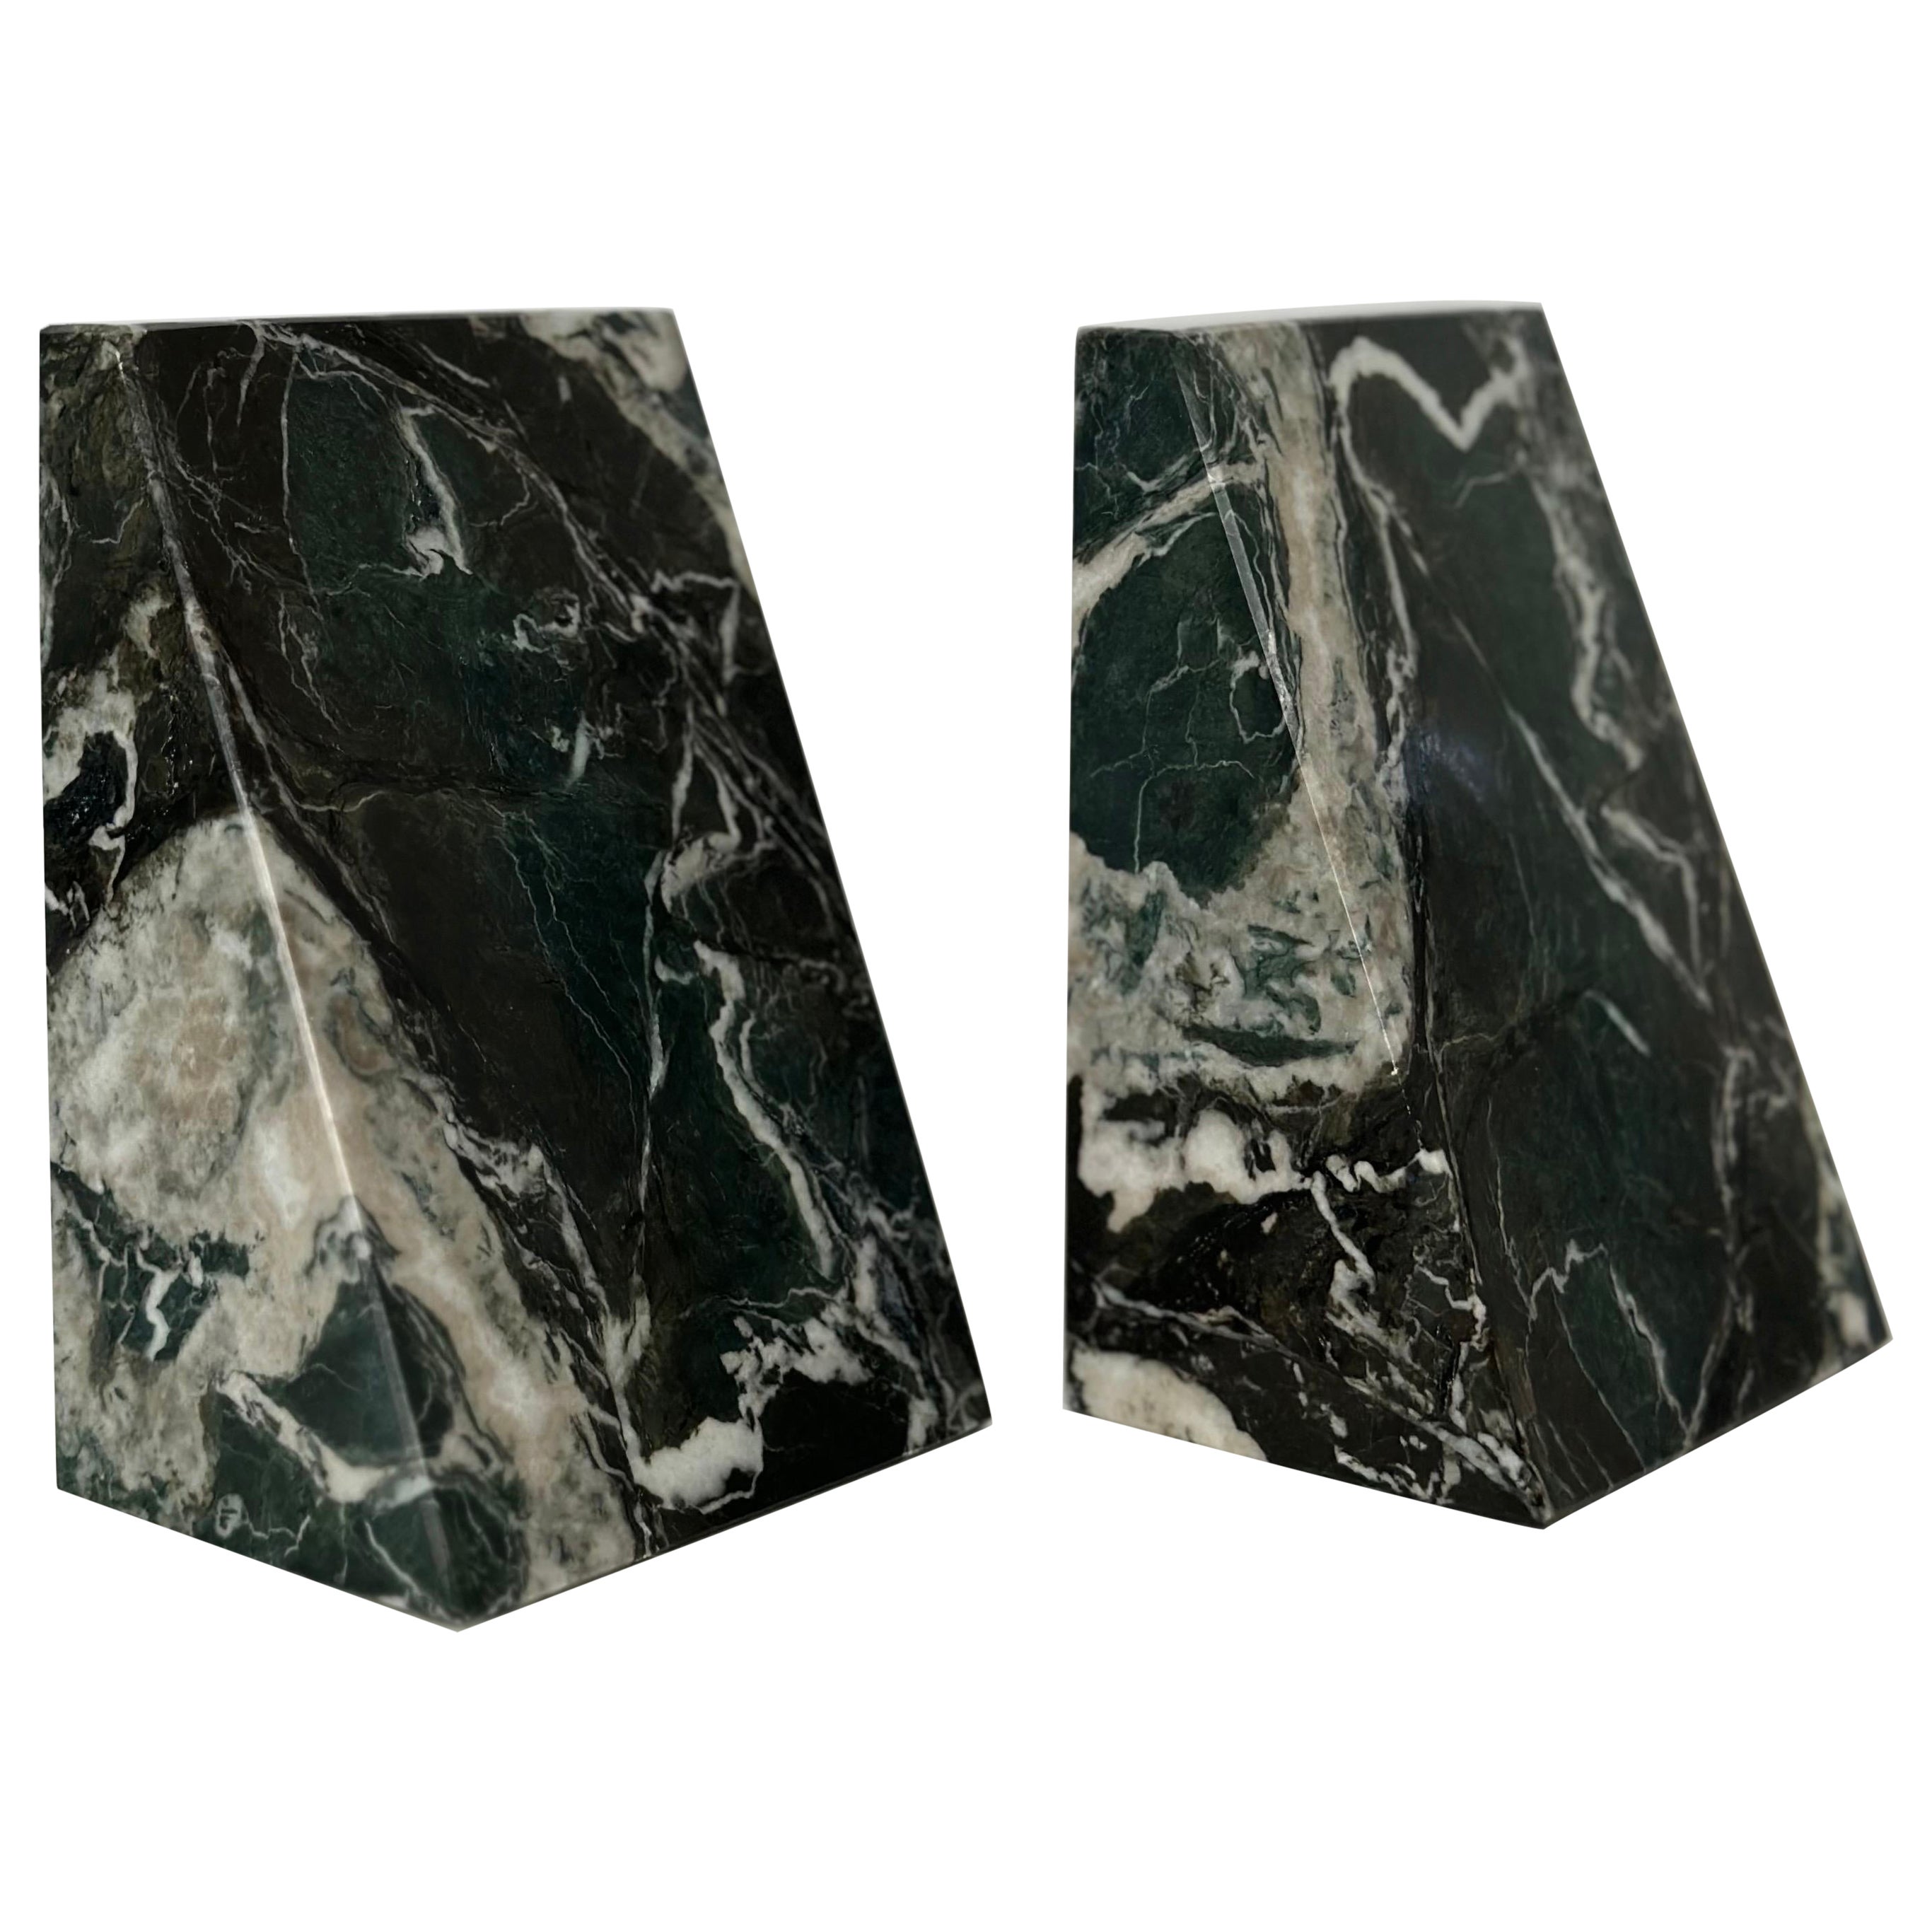 1970s Vintage Triangular Green and Black Marble Bookends - a Pair